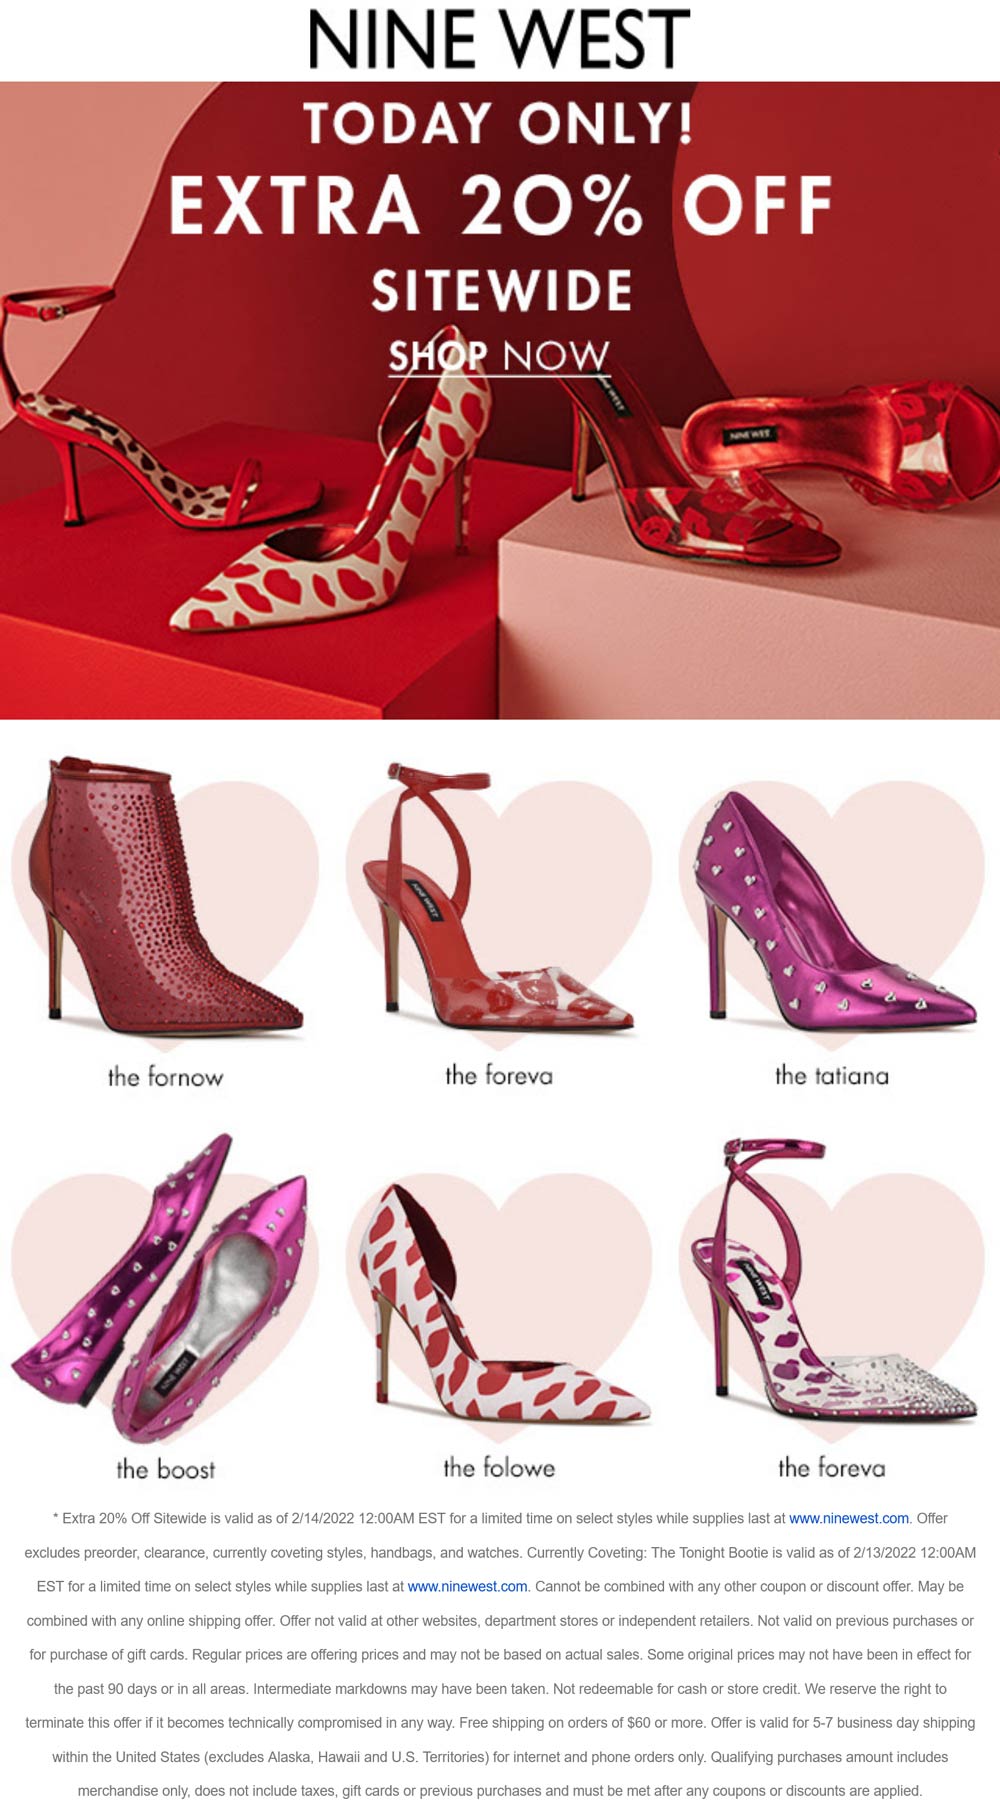 Nine West stores Coupon  Extra 20% off everything today at Nine West #ninewest 